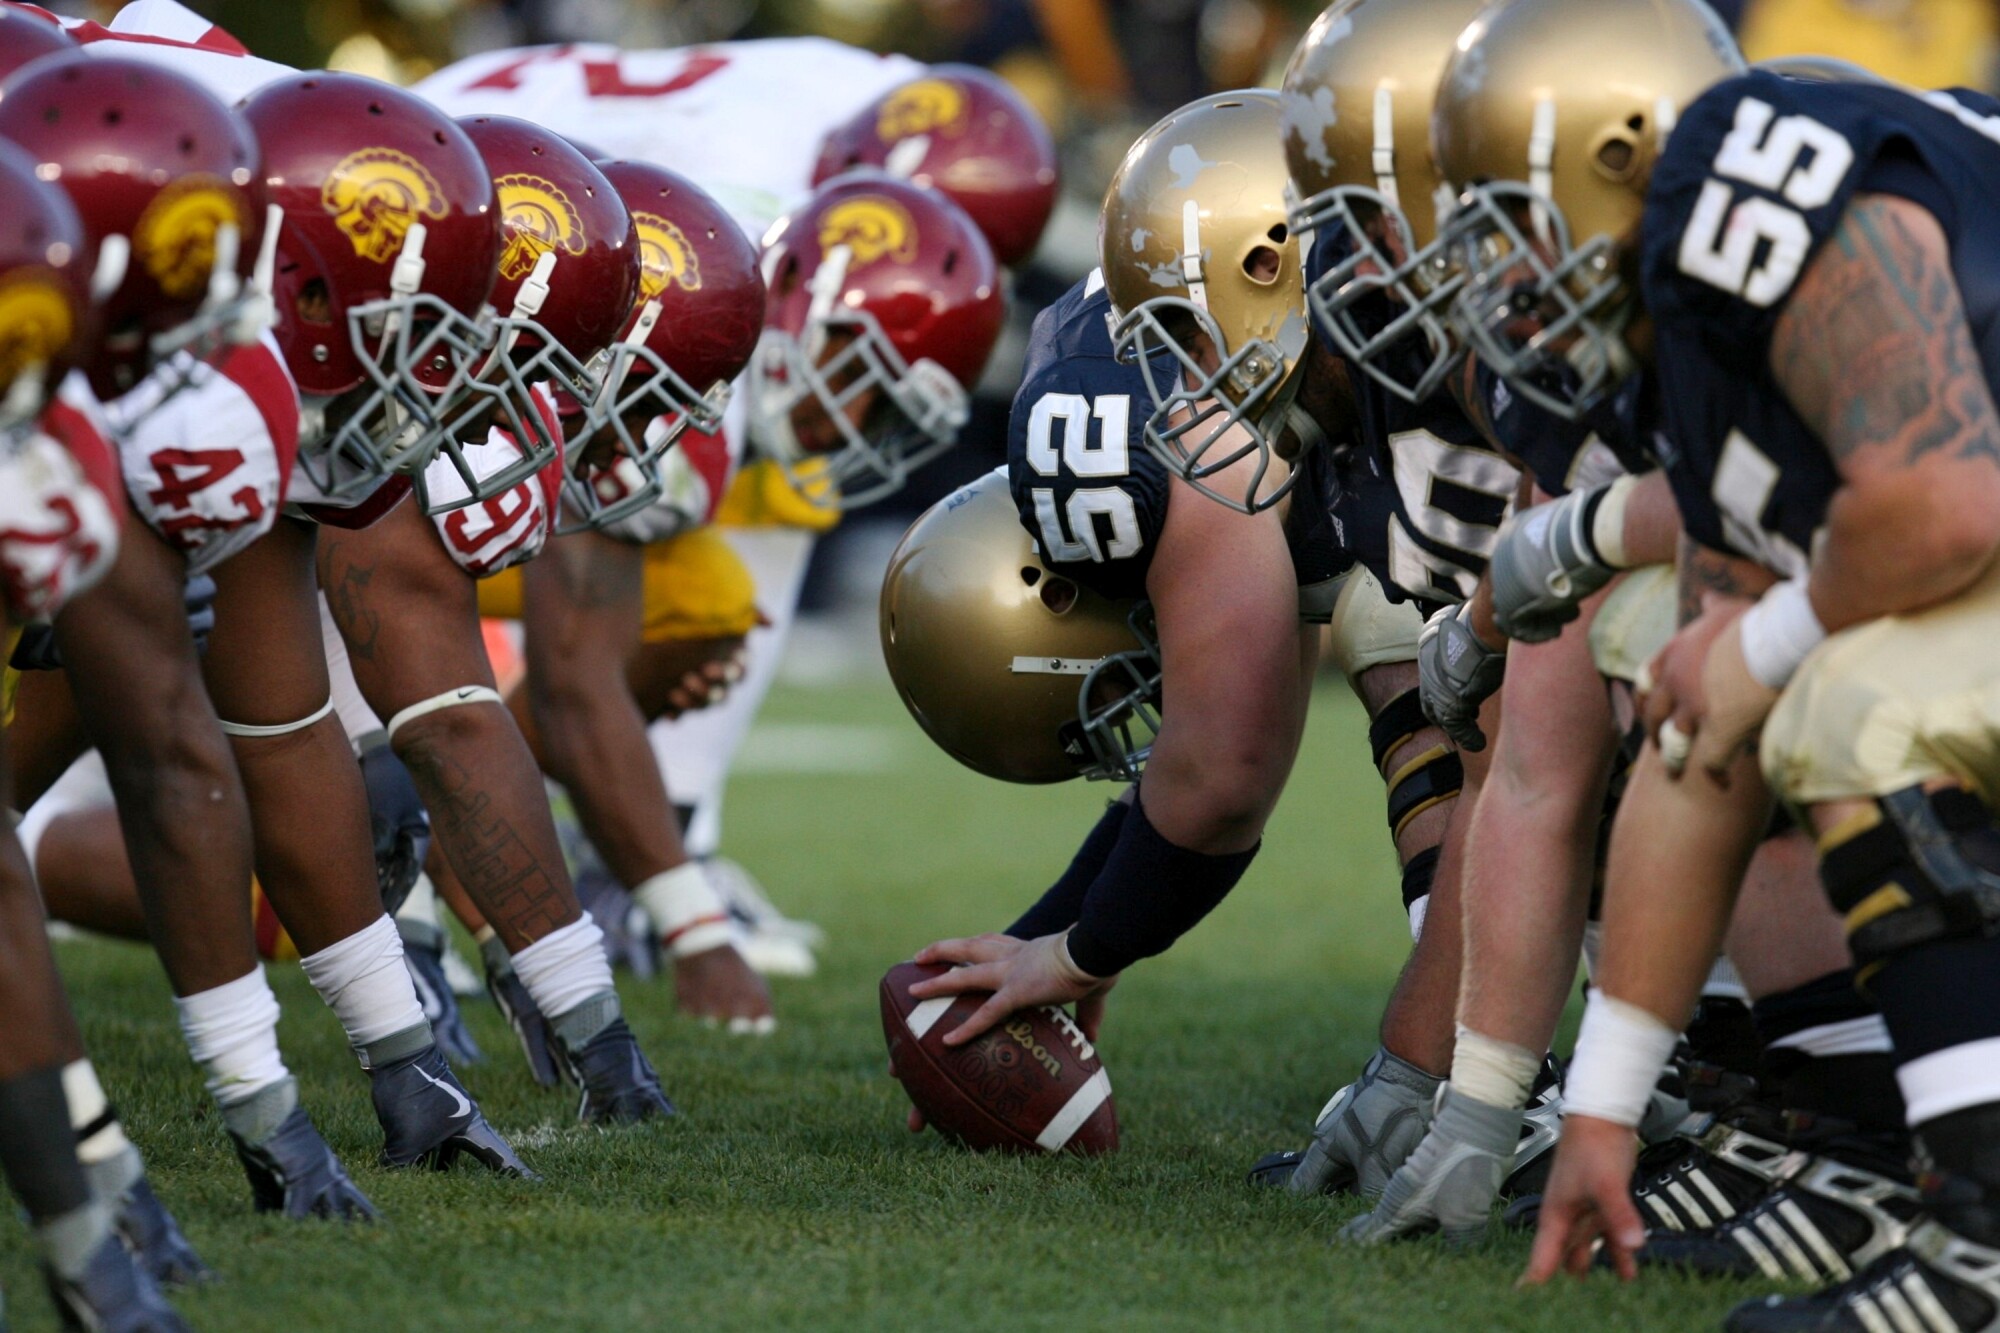 USC and Notre Dame football players line up for a play.